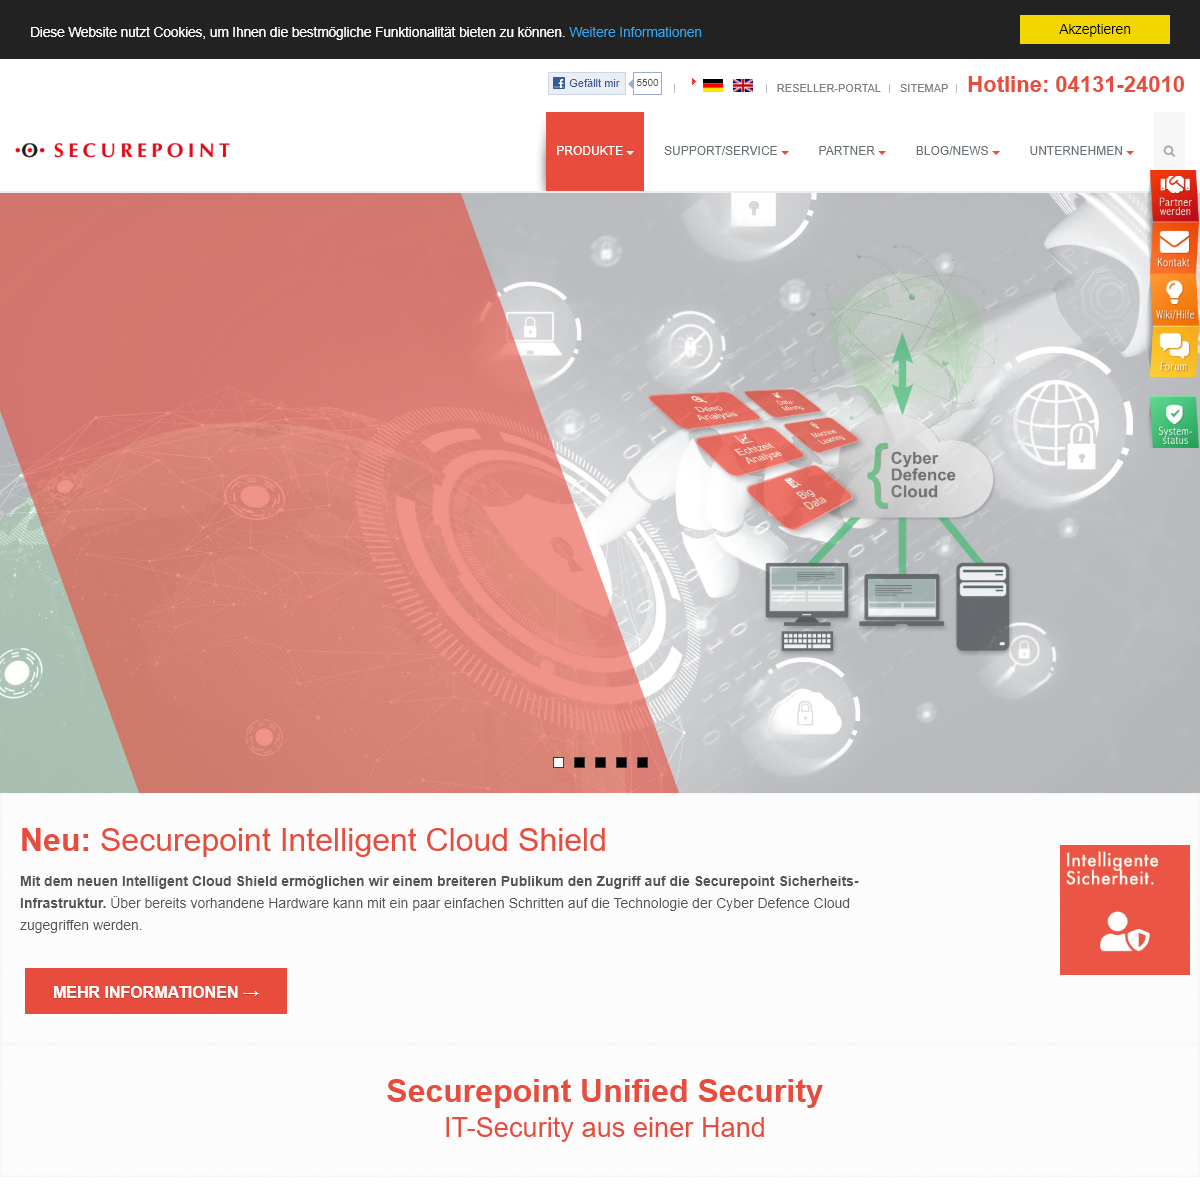 A complete backup of securepoint.de